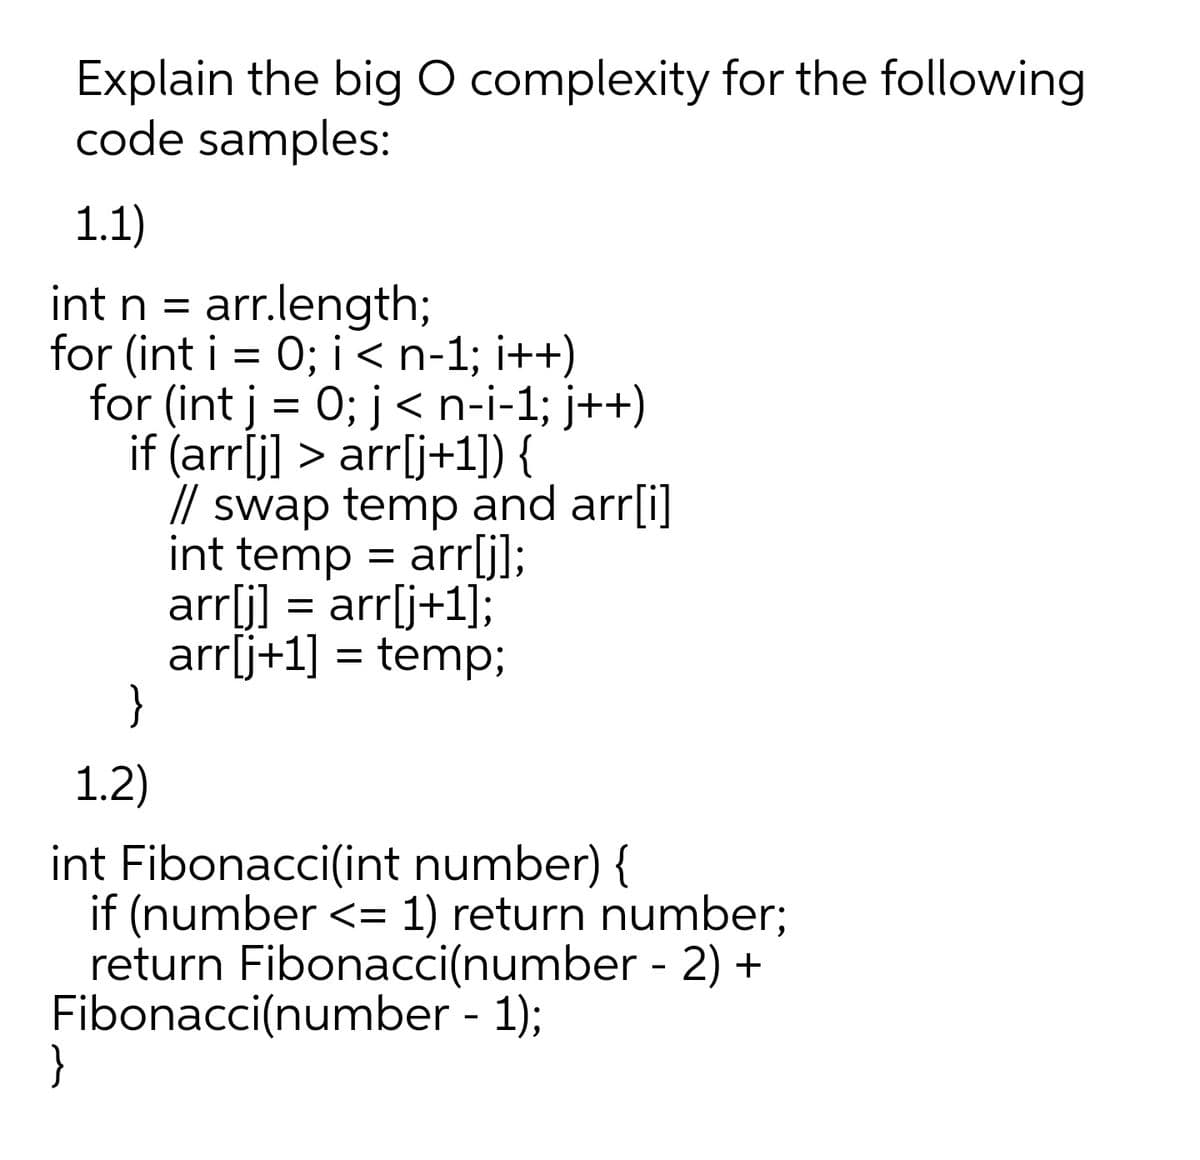 Explain the big O complexity for the following
code samples:
1.1)
int n = arr.length;
for (int i = 0; i< n-1; i++)
for (int j = 0; j< n-i-1; j++)
if (arríj] > arr[j+1]) {
// swap temp and arr[i]
int temp = arrlj];
arrli] =
arrij+1] = temp;
}
arr[j+1];
1.2)
int Fibonacci(int number) {
if (number <= 1) return number;
return Fibonacci(number - 2) +
Fibonacci(number - 1);
}
